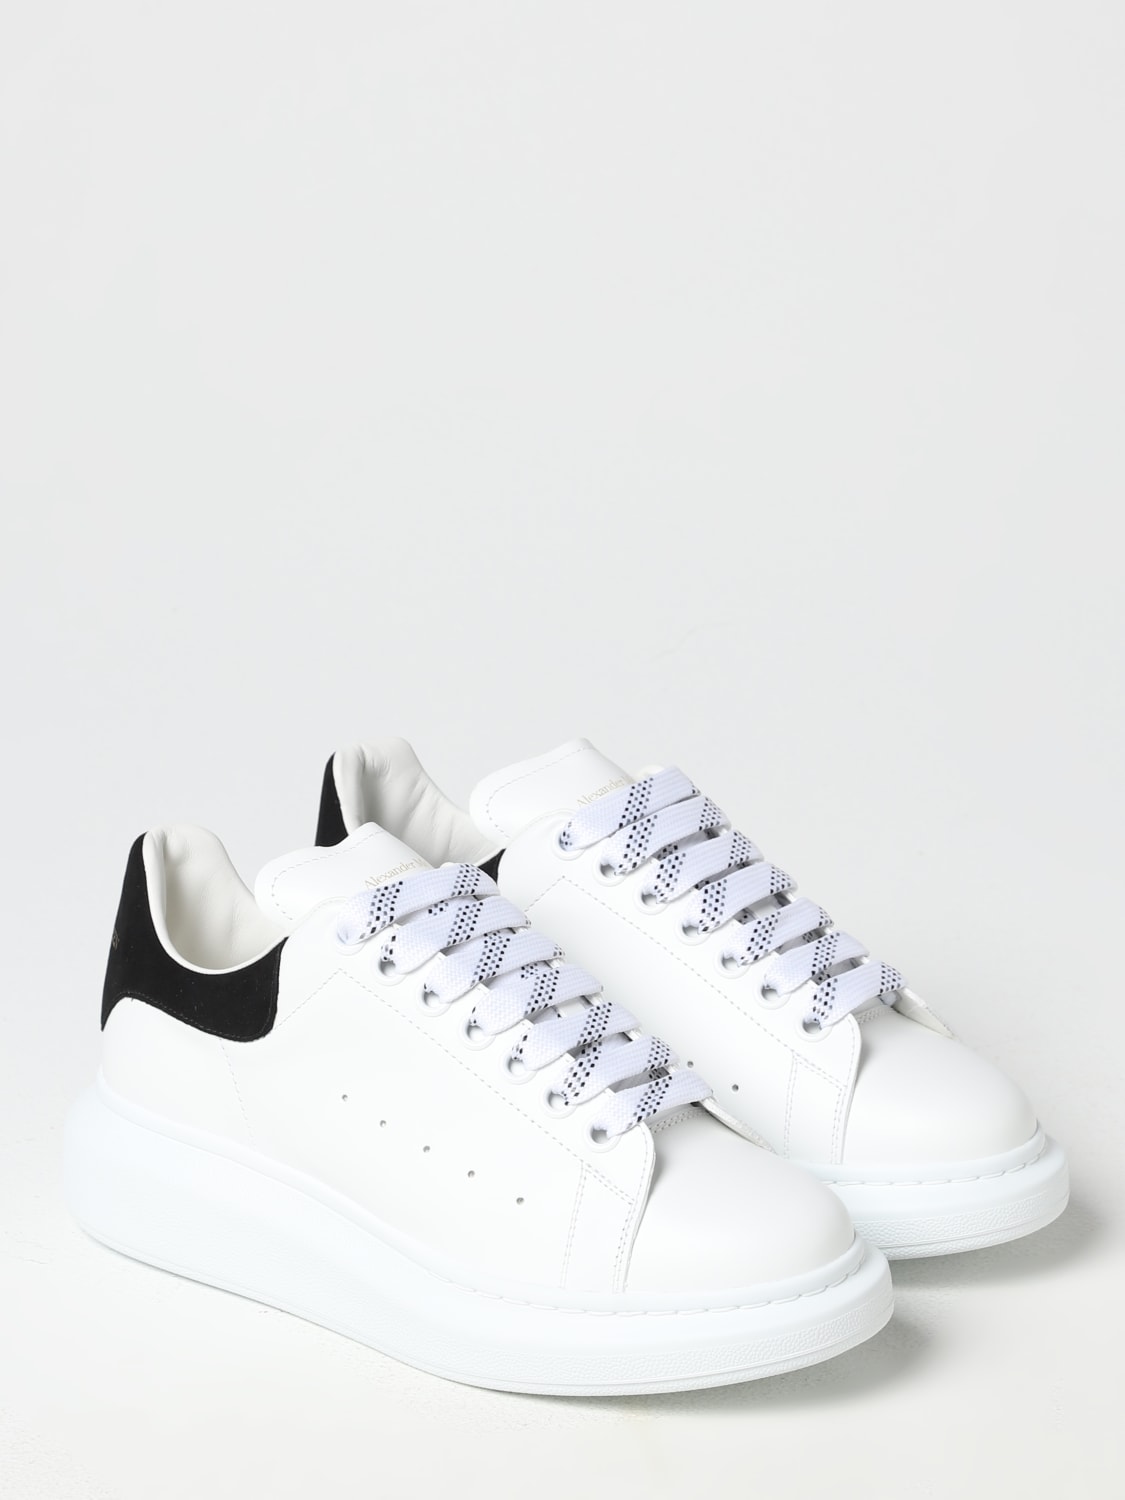 ALEXANDER leather sneakers - White 1 | Alexander Mcqueen sneakers 553770WHGP7 online at GIGLIO.COM